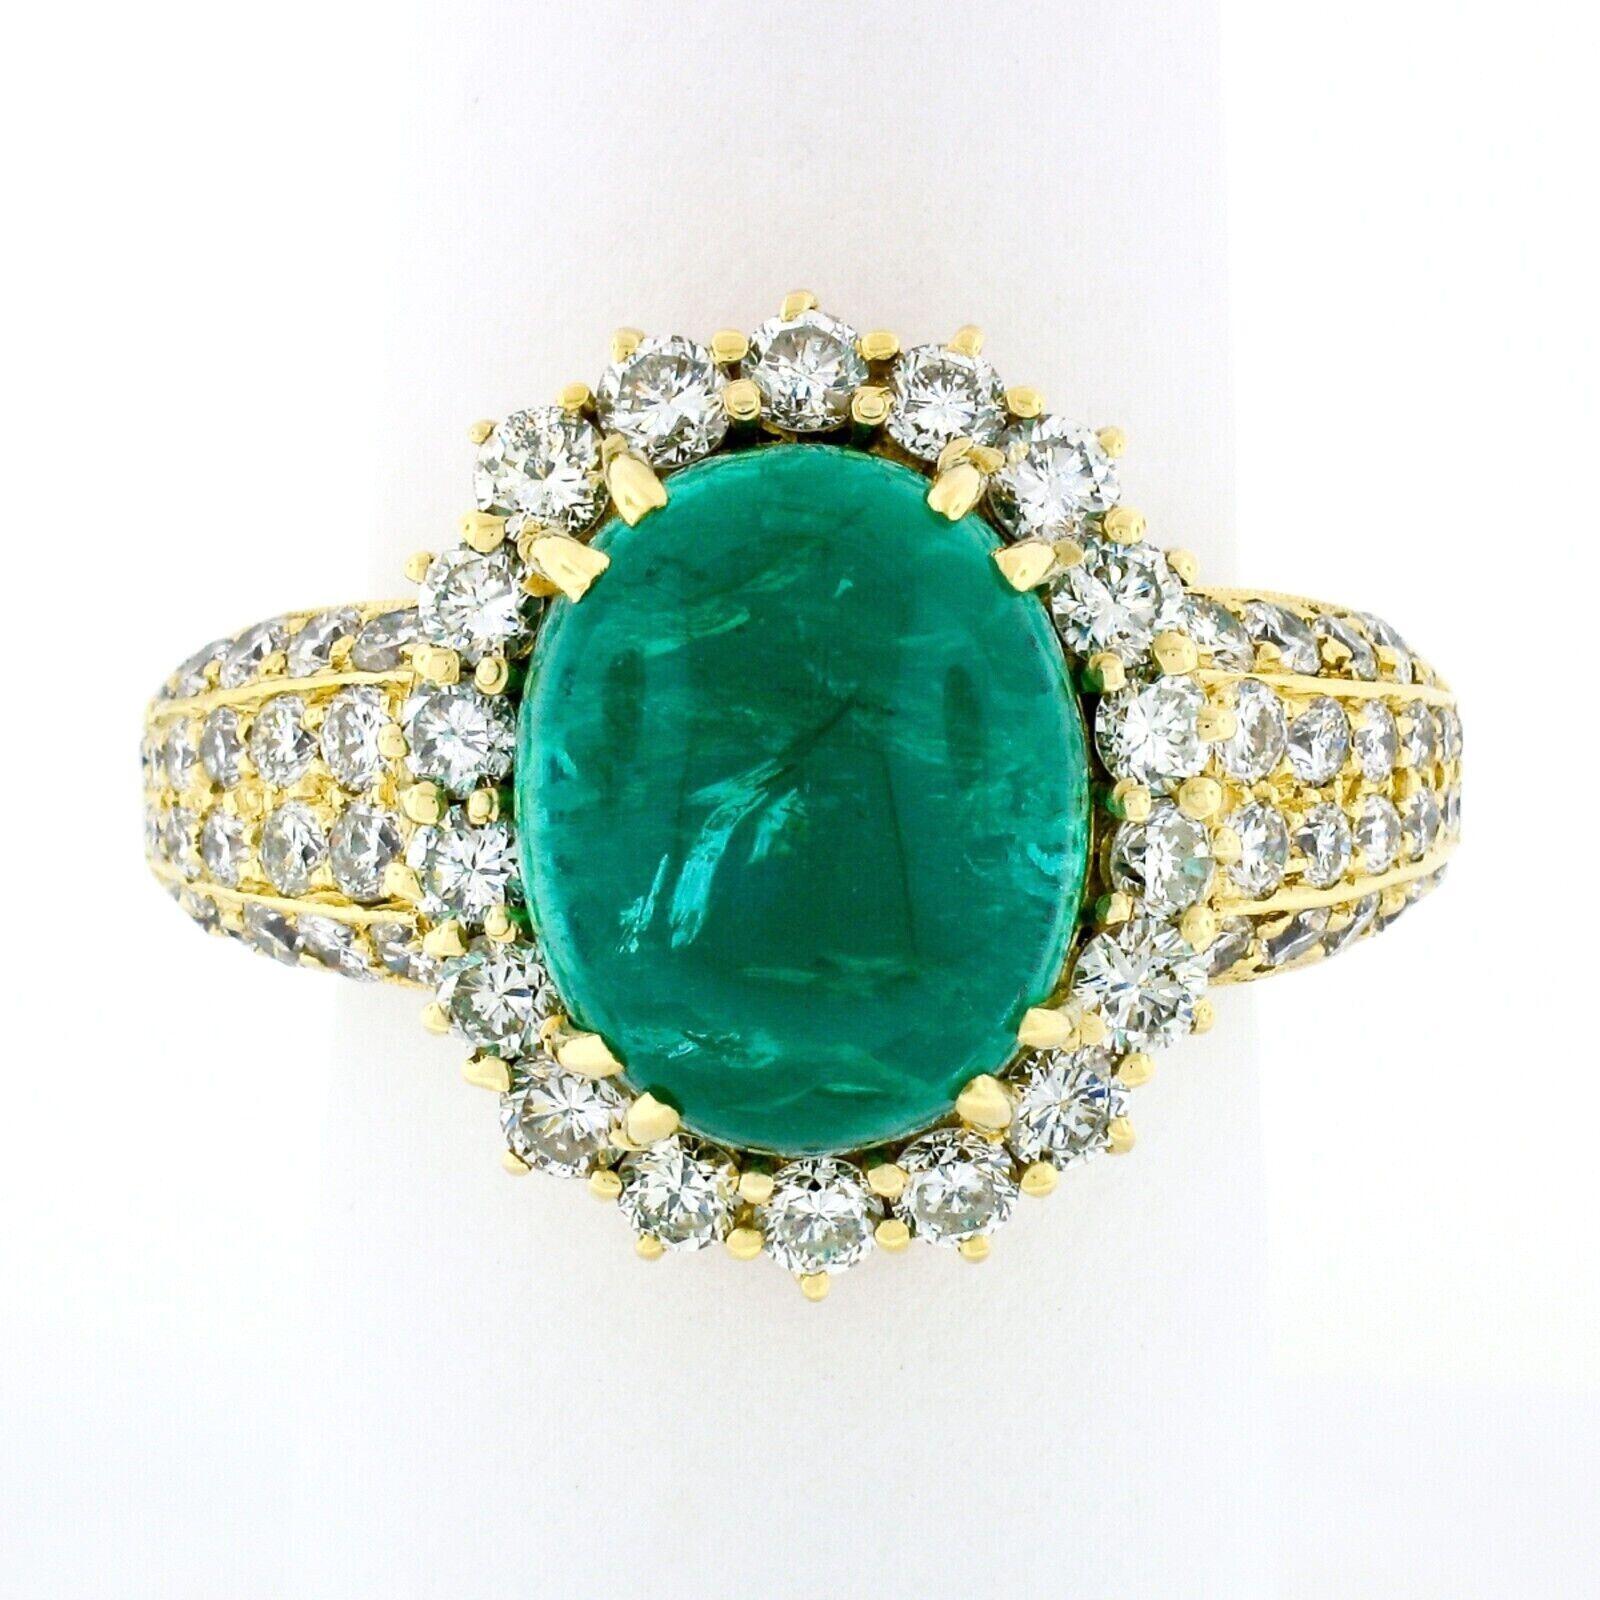 This gorgeous, vintage, AGL certified emerald and diamond cocktail ring was crafted from solid 18k yellow gold. It features a breathtaking, natural, oval cabochon cut emerald that displays a very rich and lively green color. The stone is dual prong